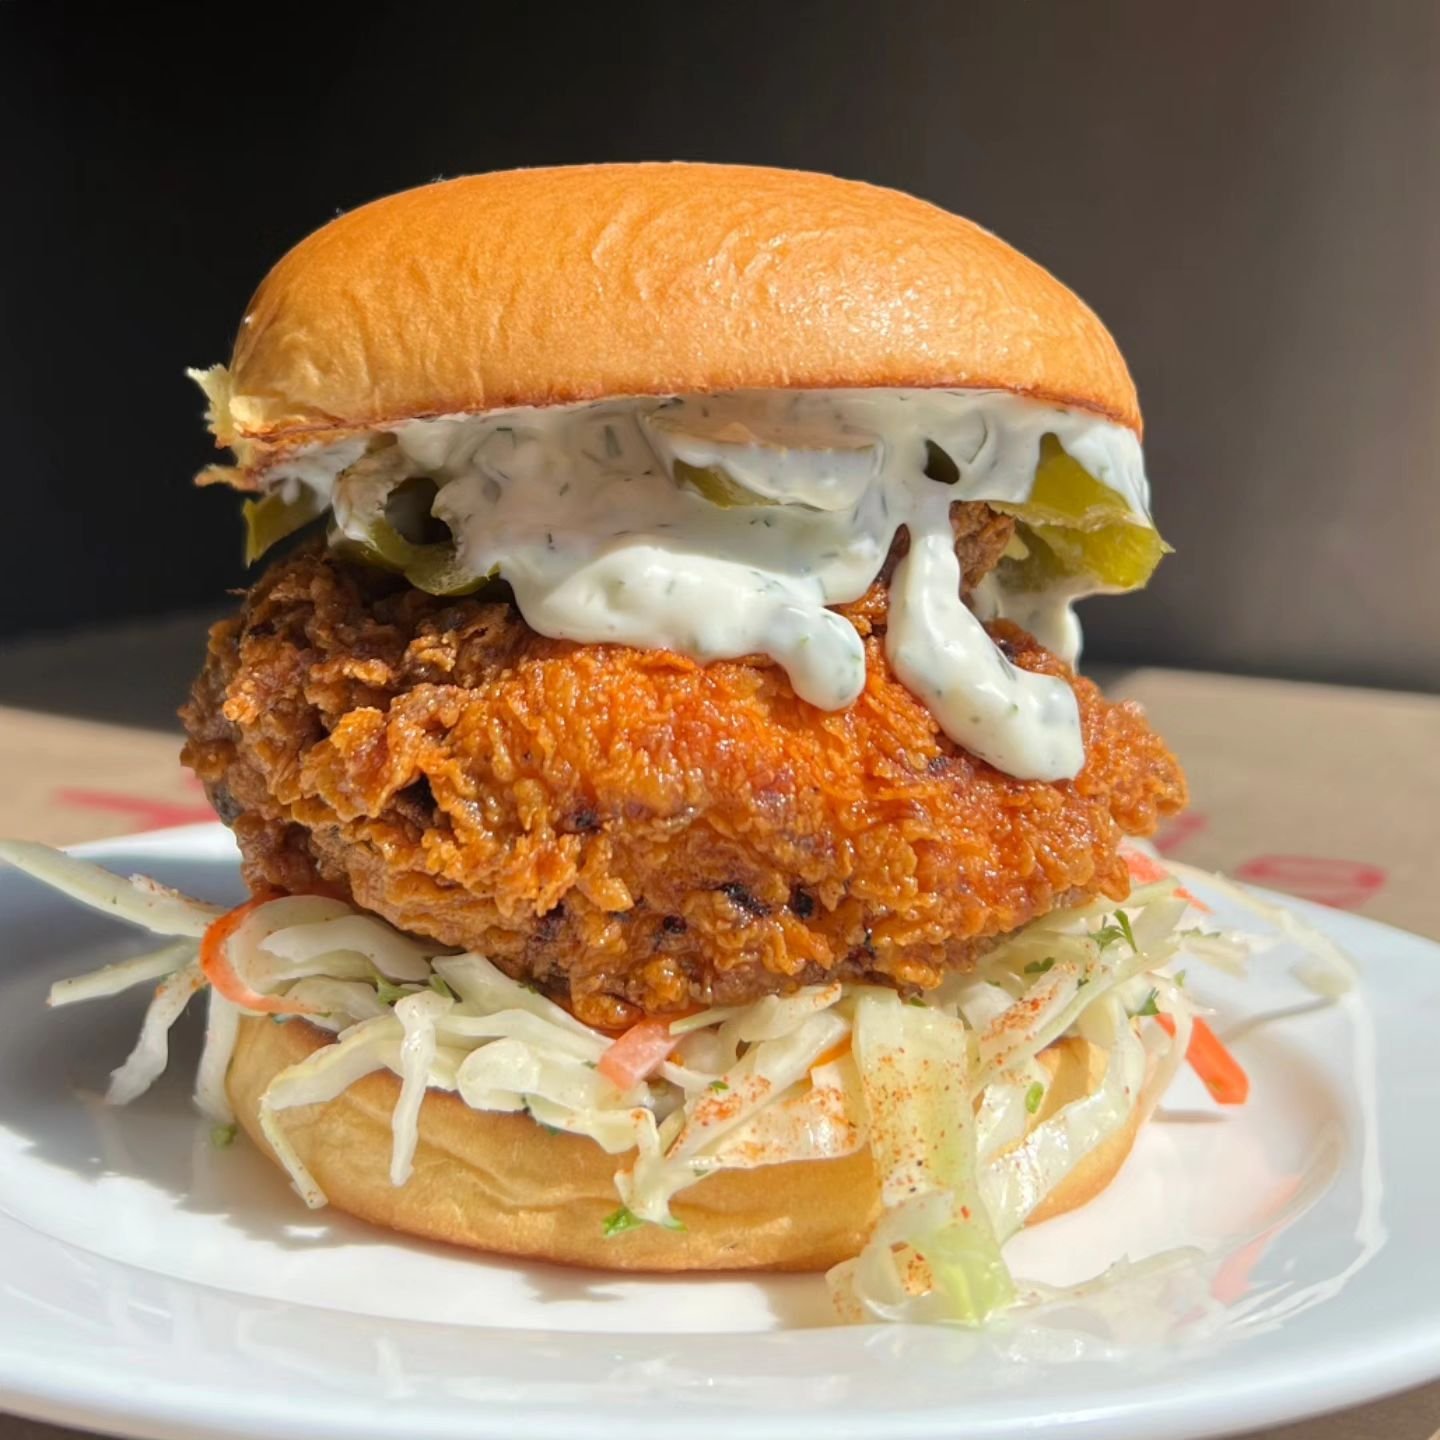 Chicken Nashville
available in-store only